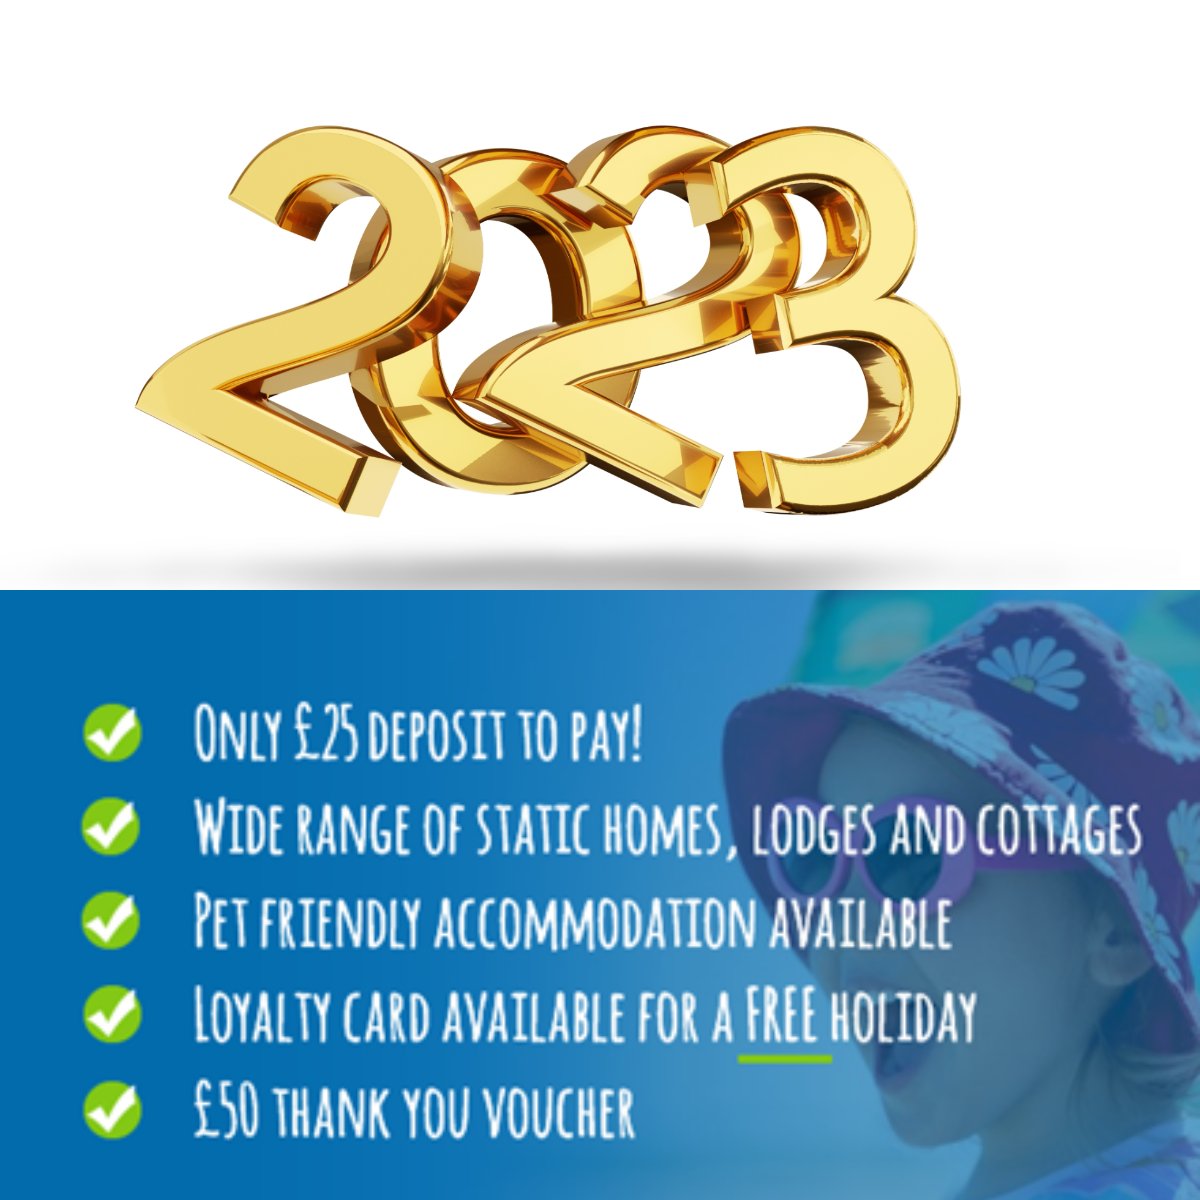 🟡Book now for 2023
🟢£25 deposit 
🟠 Take your pick! Booking early means that you can find a holiday that perfectly suits your needs! #2023 #2023holidays #lowdeposit #familyholiday #2023uk #earlybird #spring2023 #summer2023 #autumn2023 #familybreak #lowdeposits #britishbreaks